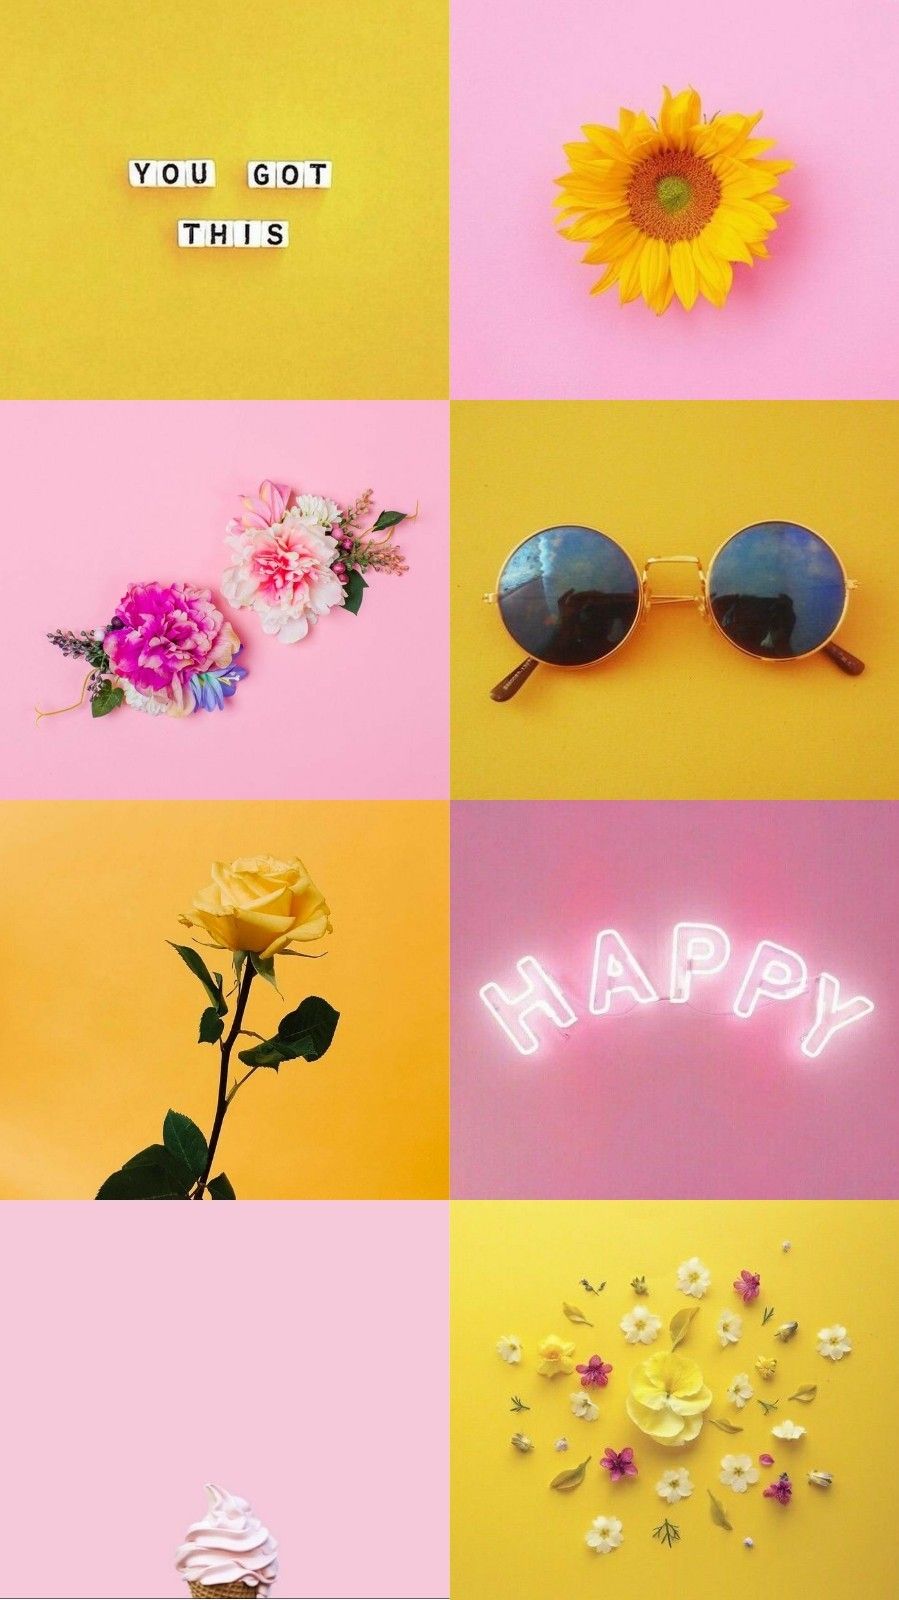 Aesthetic wallpaper background for phone with yellow and pink - Pastel yellow, yellow iphone, summer